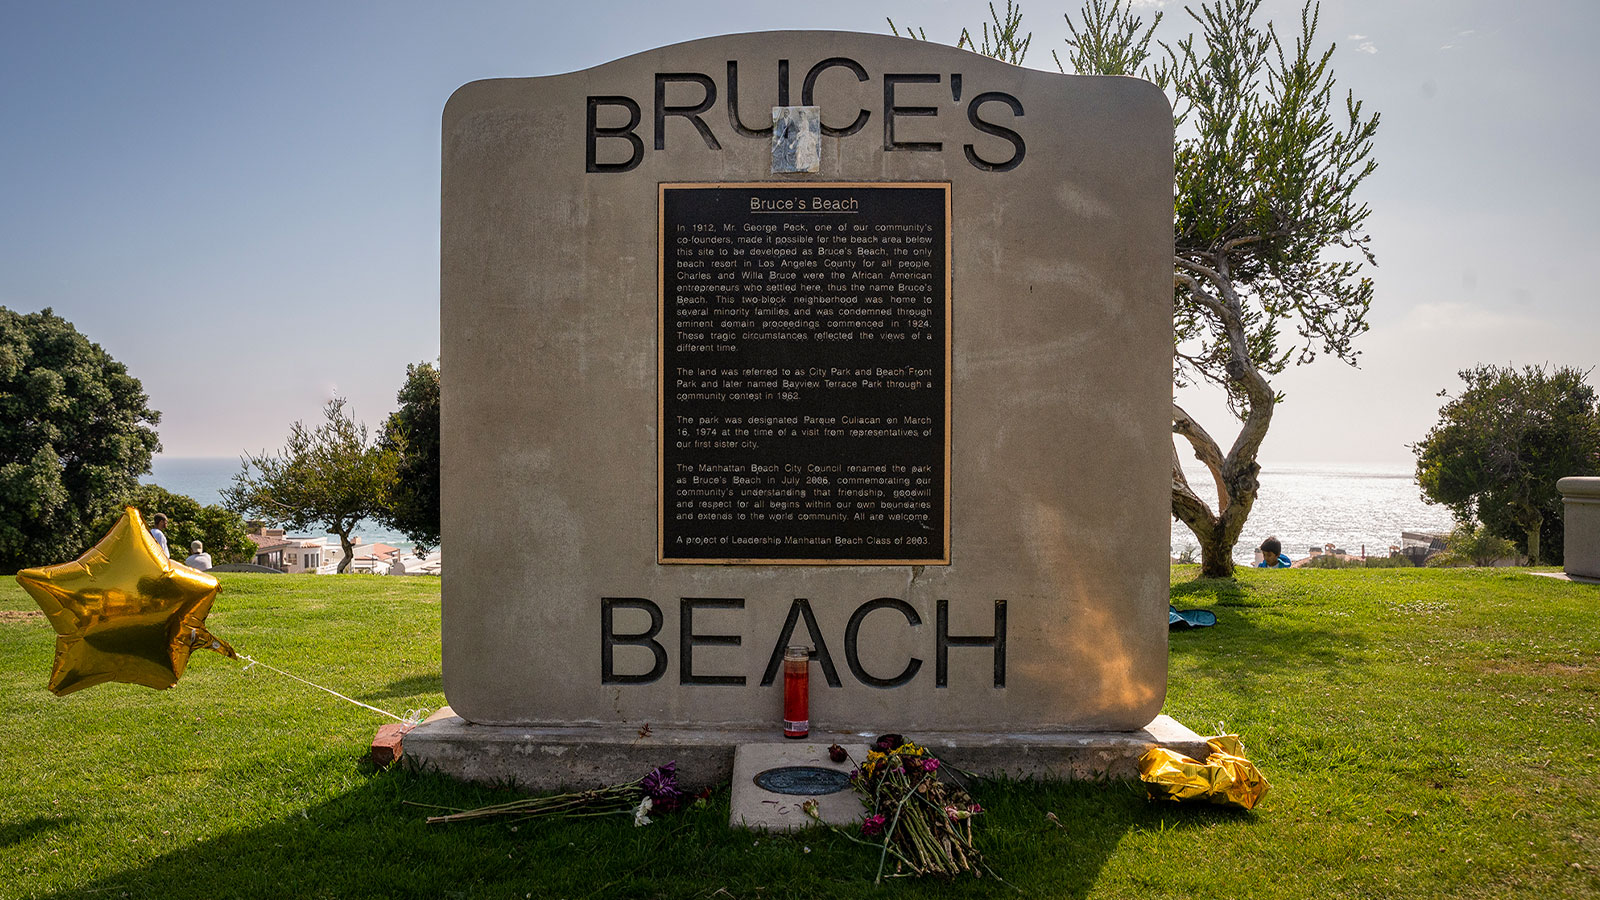 Bruce’s Beach in Manhattan Beach on June 30,2022. The beach was returned to the descendants of the Bruce family in 2022.